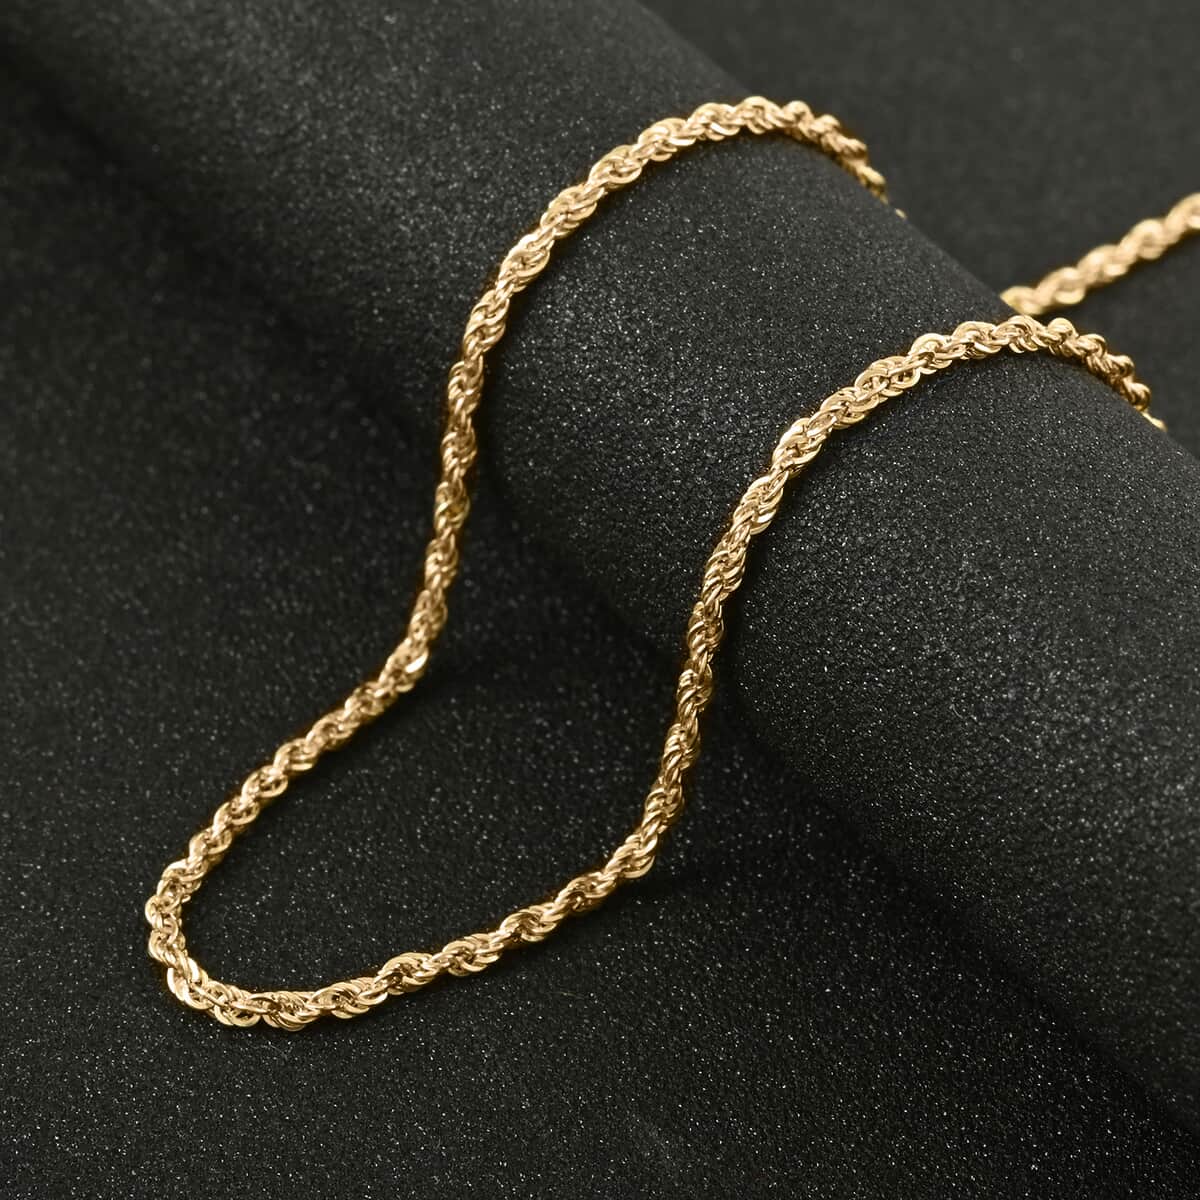 10K Yellow Gold 5mm Rope Chain Necklace 24 Inches 9.40 Grams